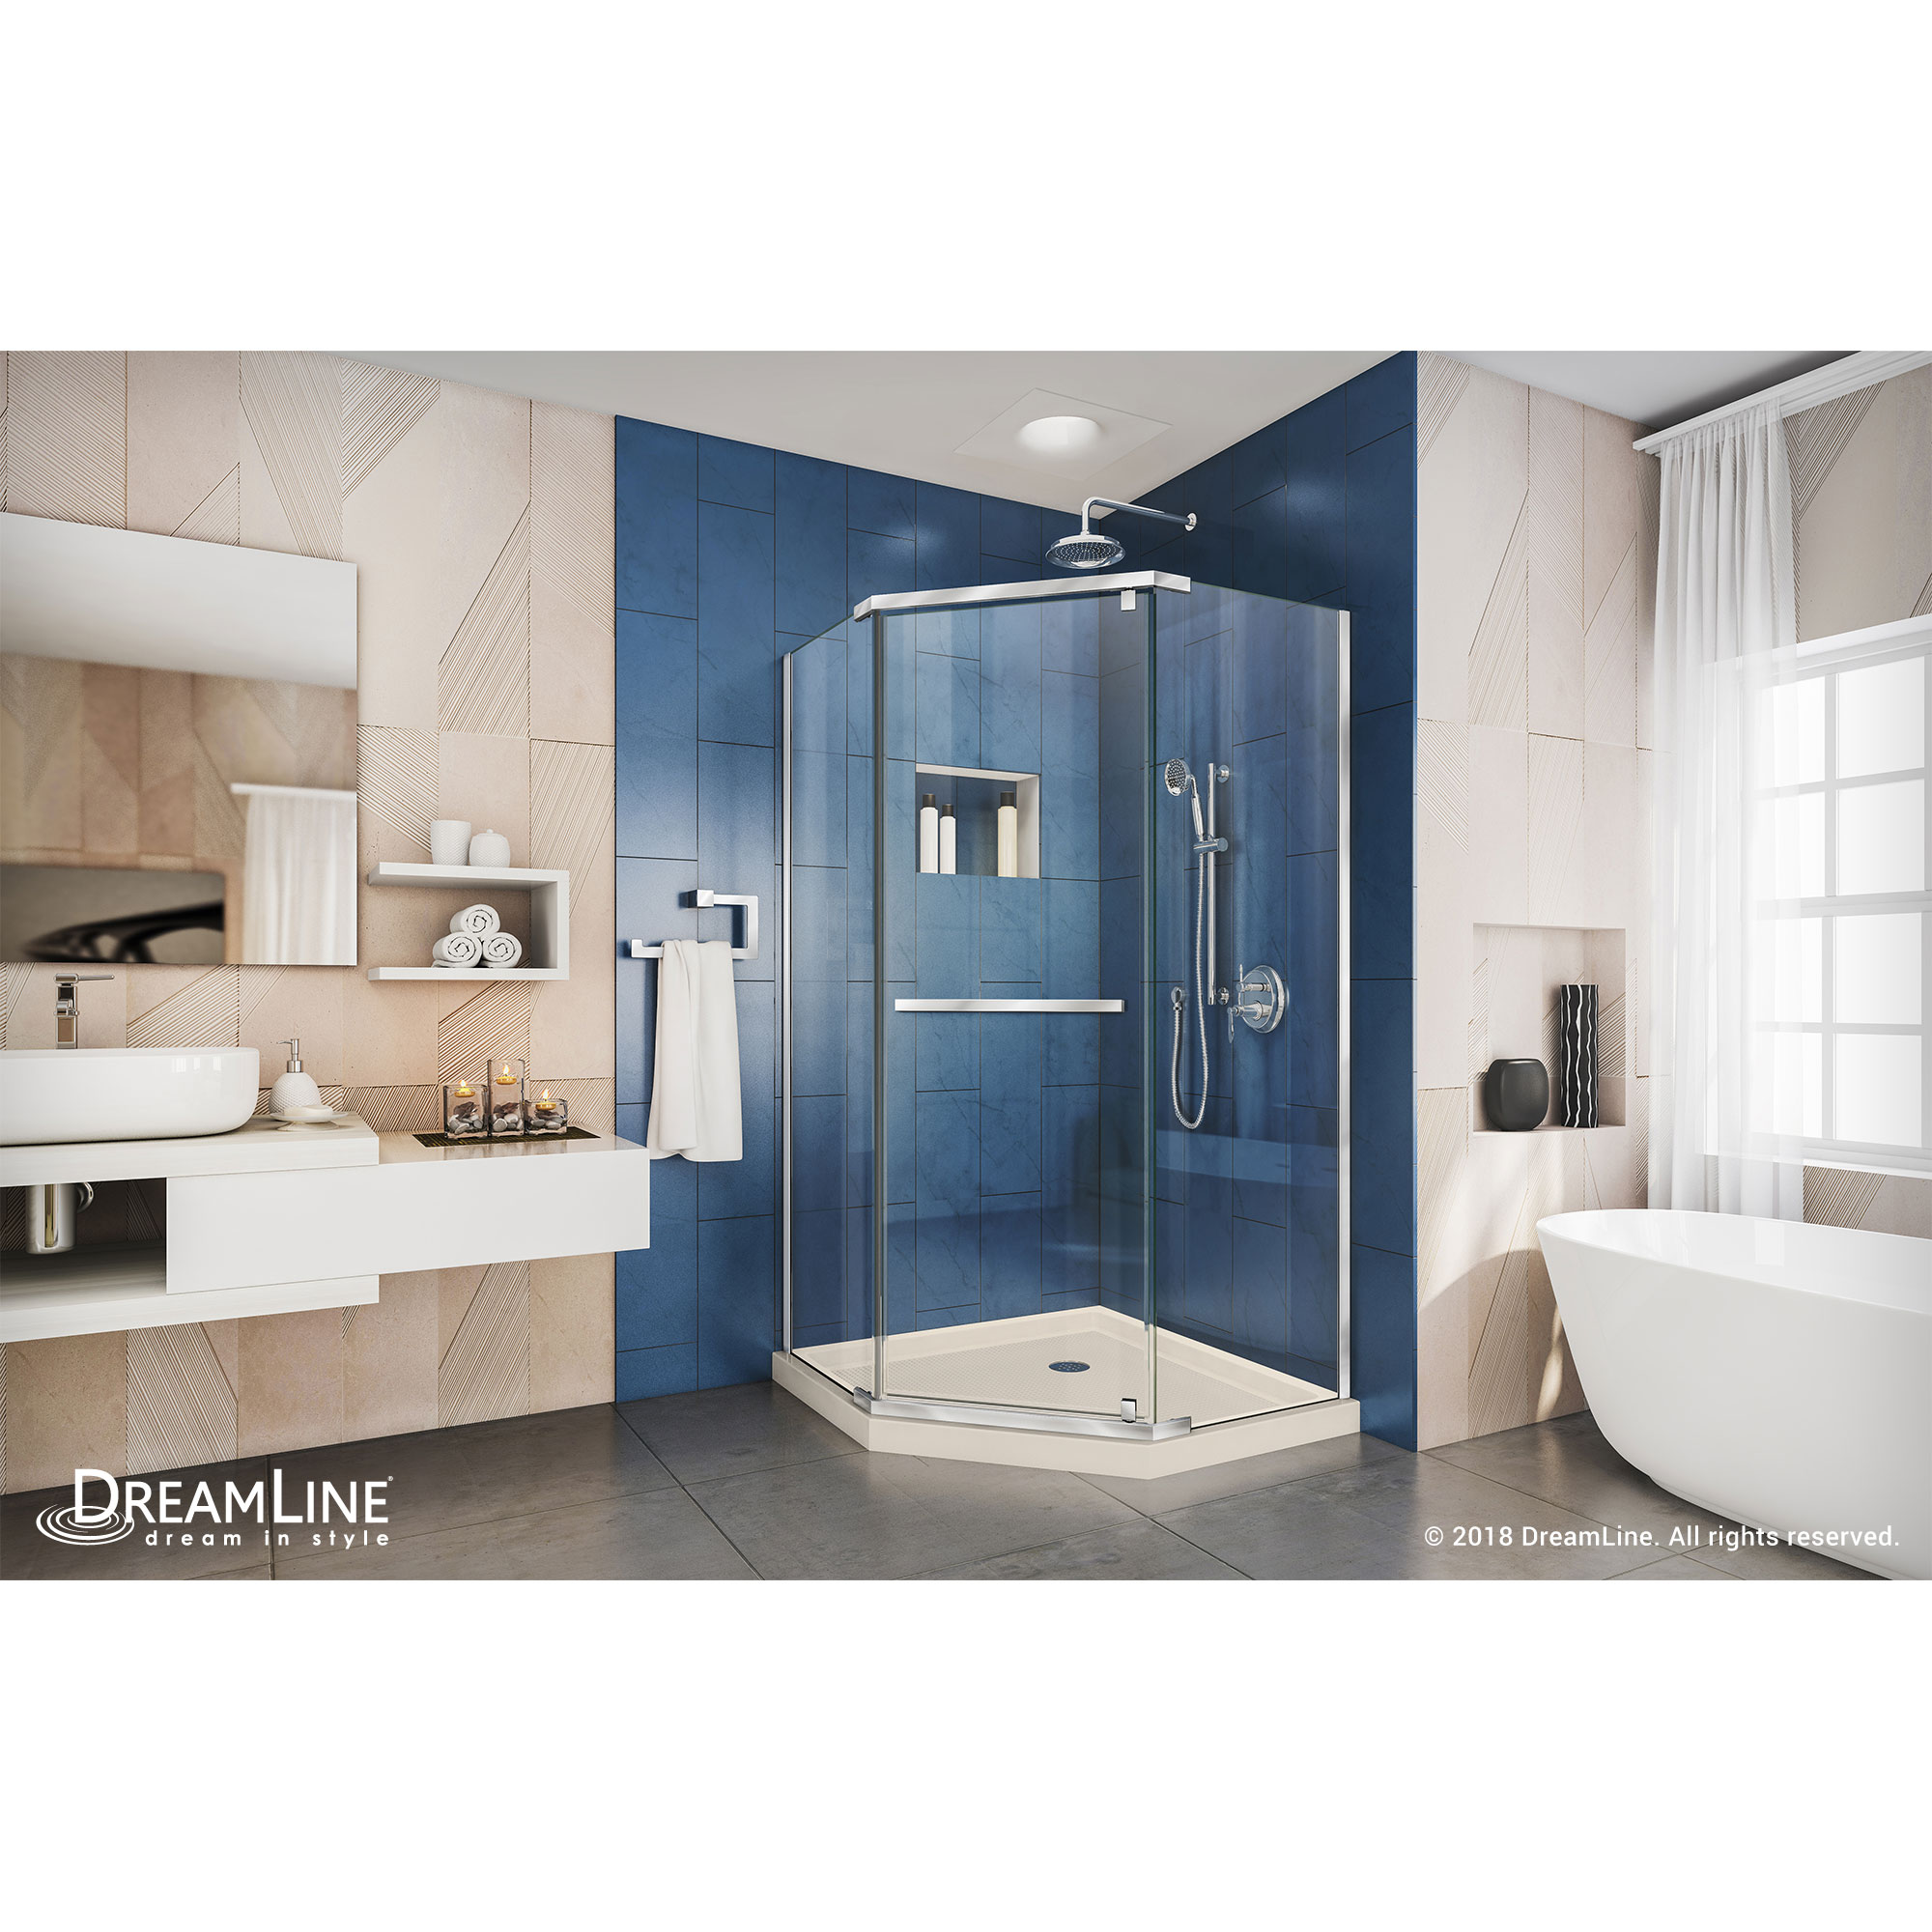 DreamLine Prism 38 in. D x 38 in. W x 74 3/4 H Pivot Shower Enclosure in Chrome and Corner Drain Biscuit Base Kit